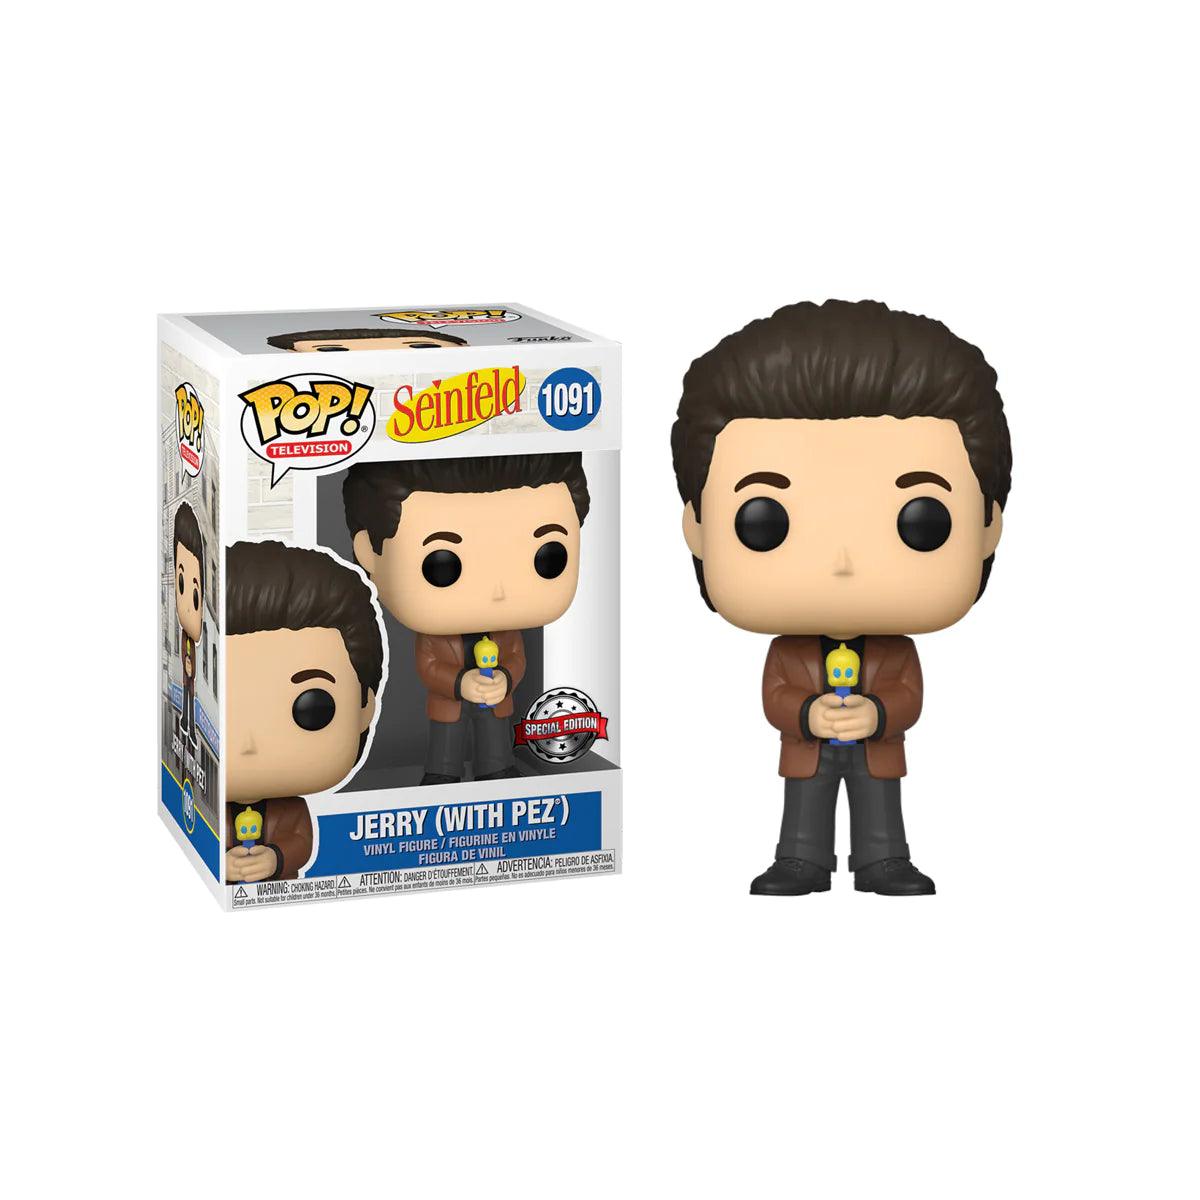 Pop! Television - Seinfeld - Jerry (With Pez)- #1091 - SPECIAL Edition - Hobby Champion Inc